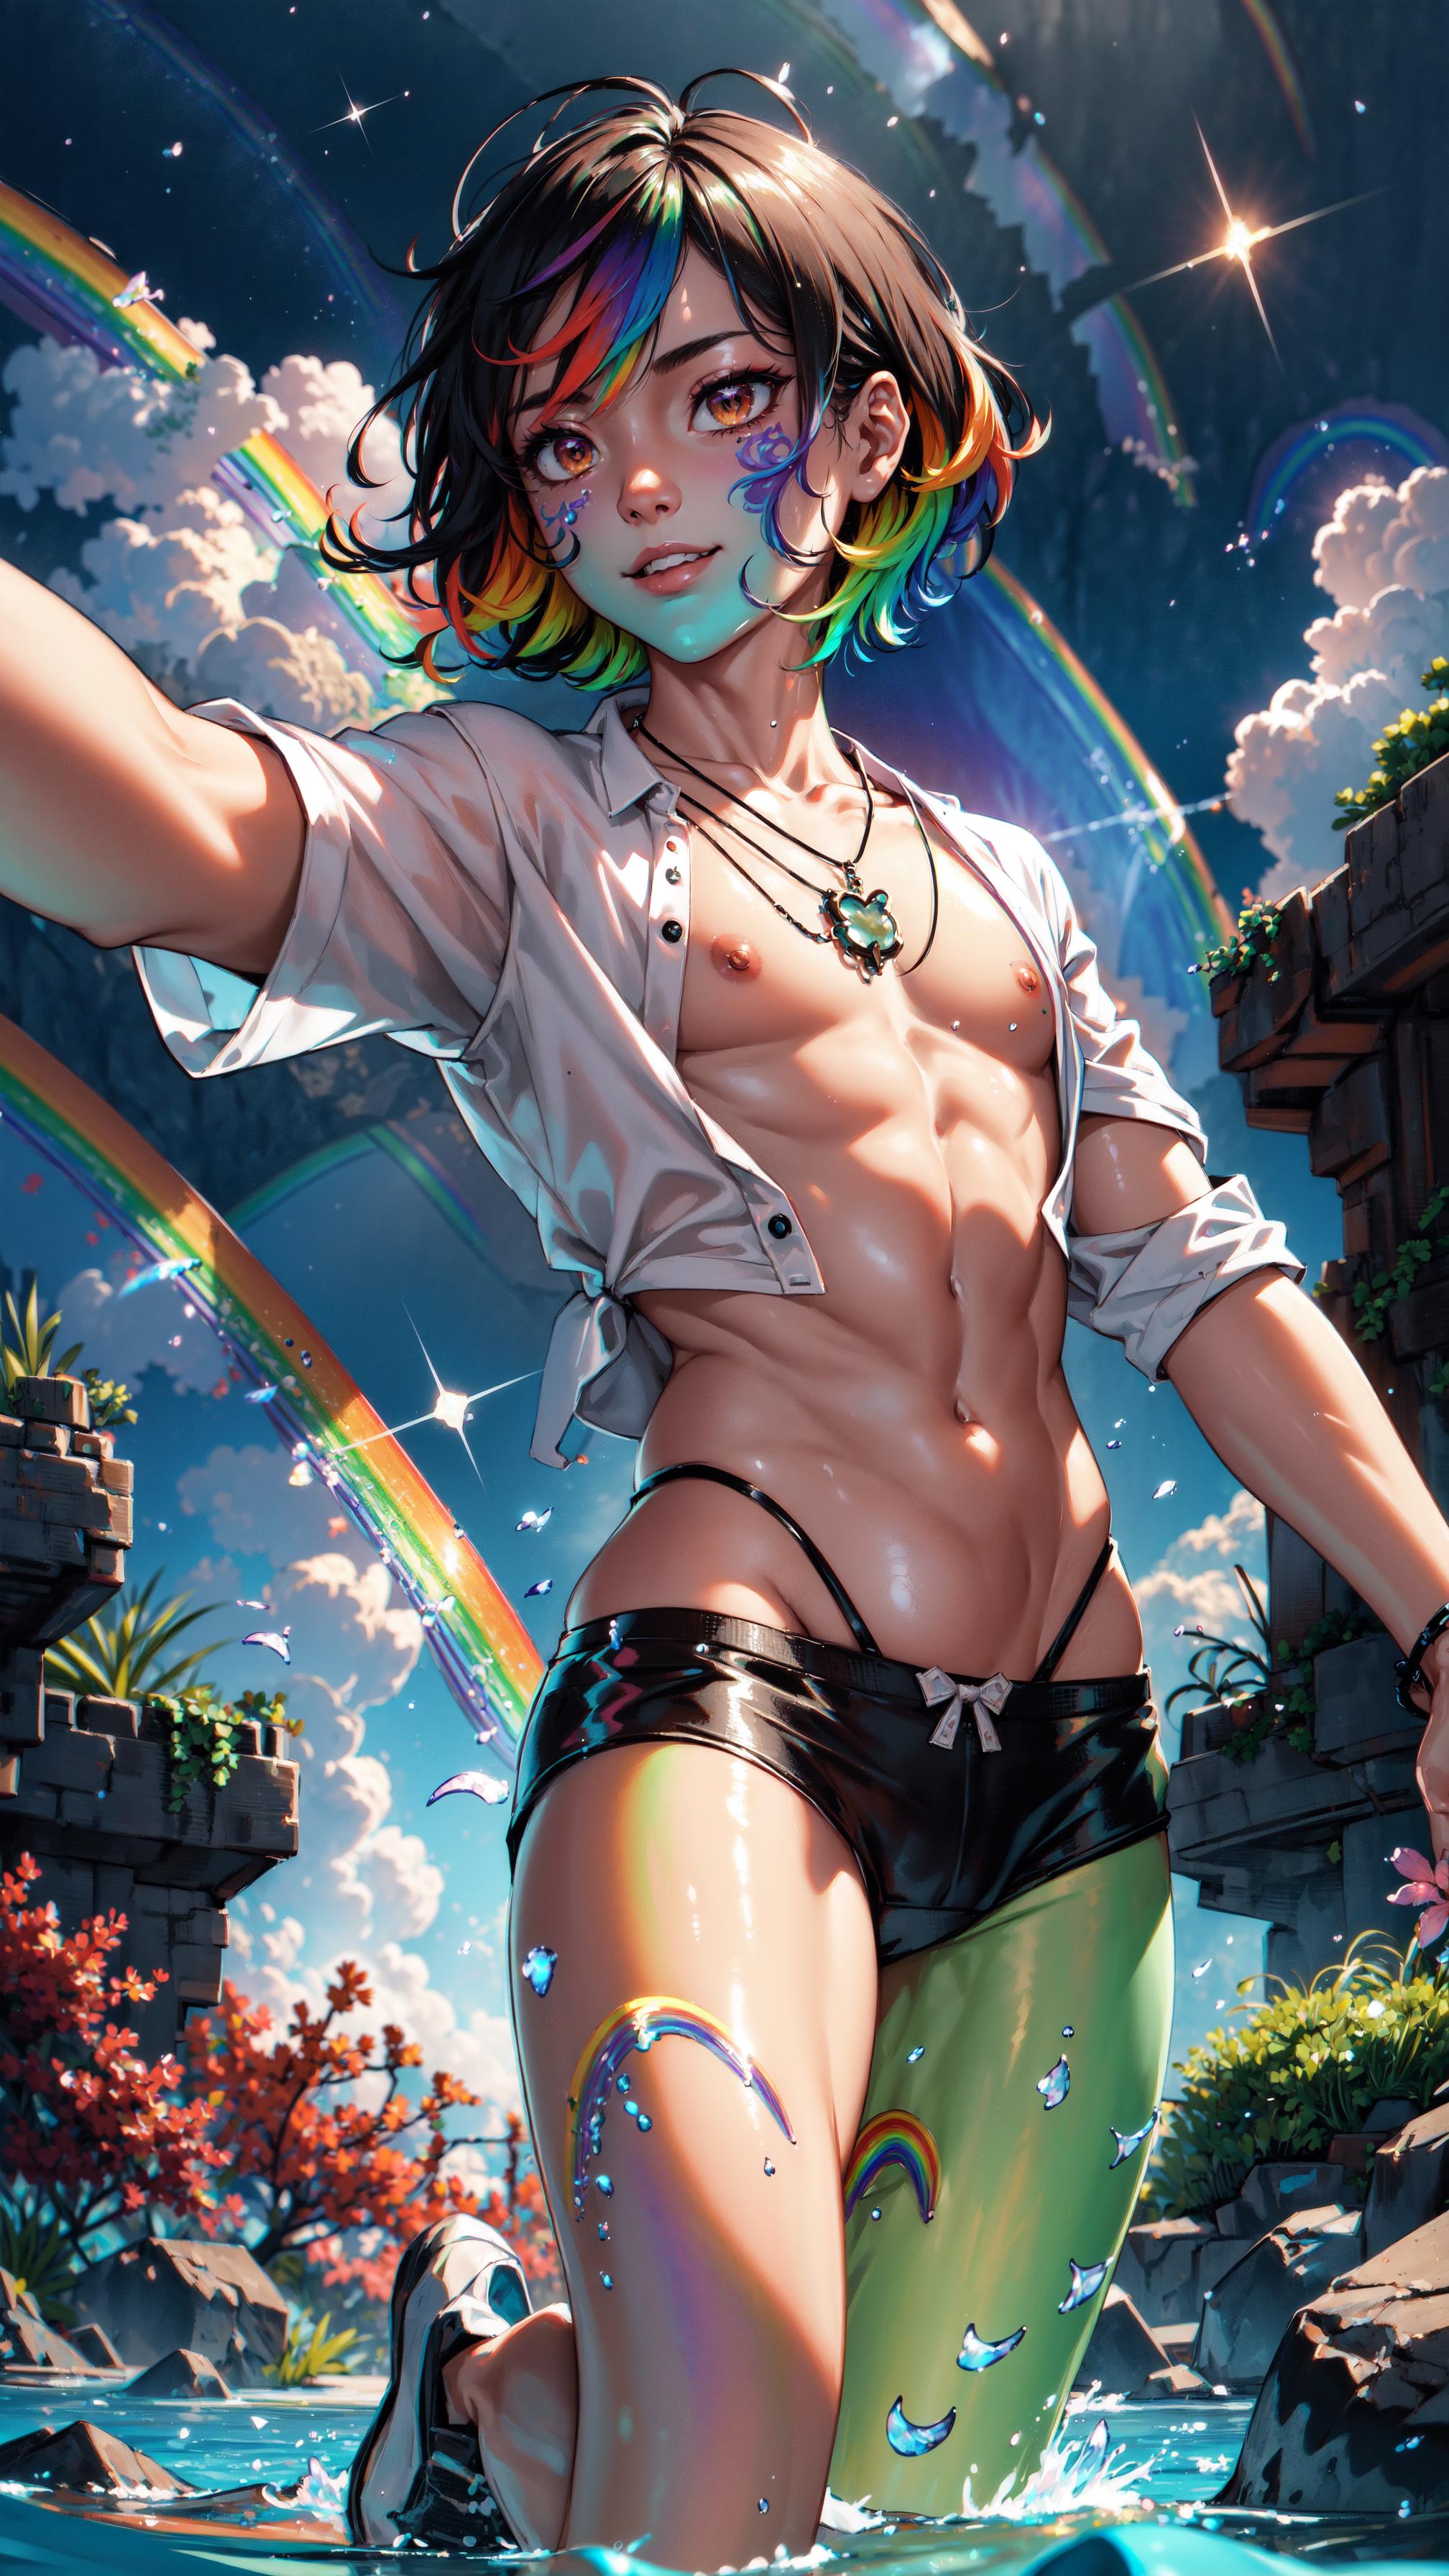 Anime-Style Artwork of a Shirtless Man with Rainbow Hair and Rainbow Shorts.